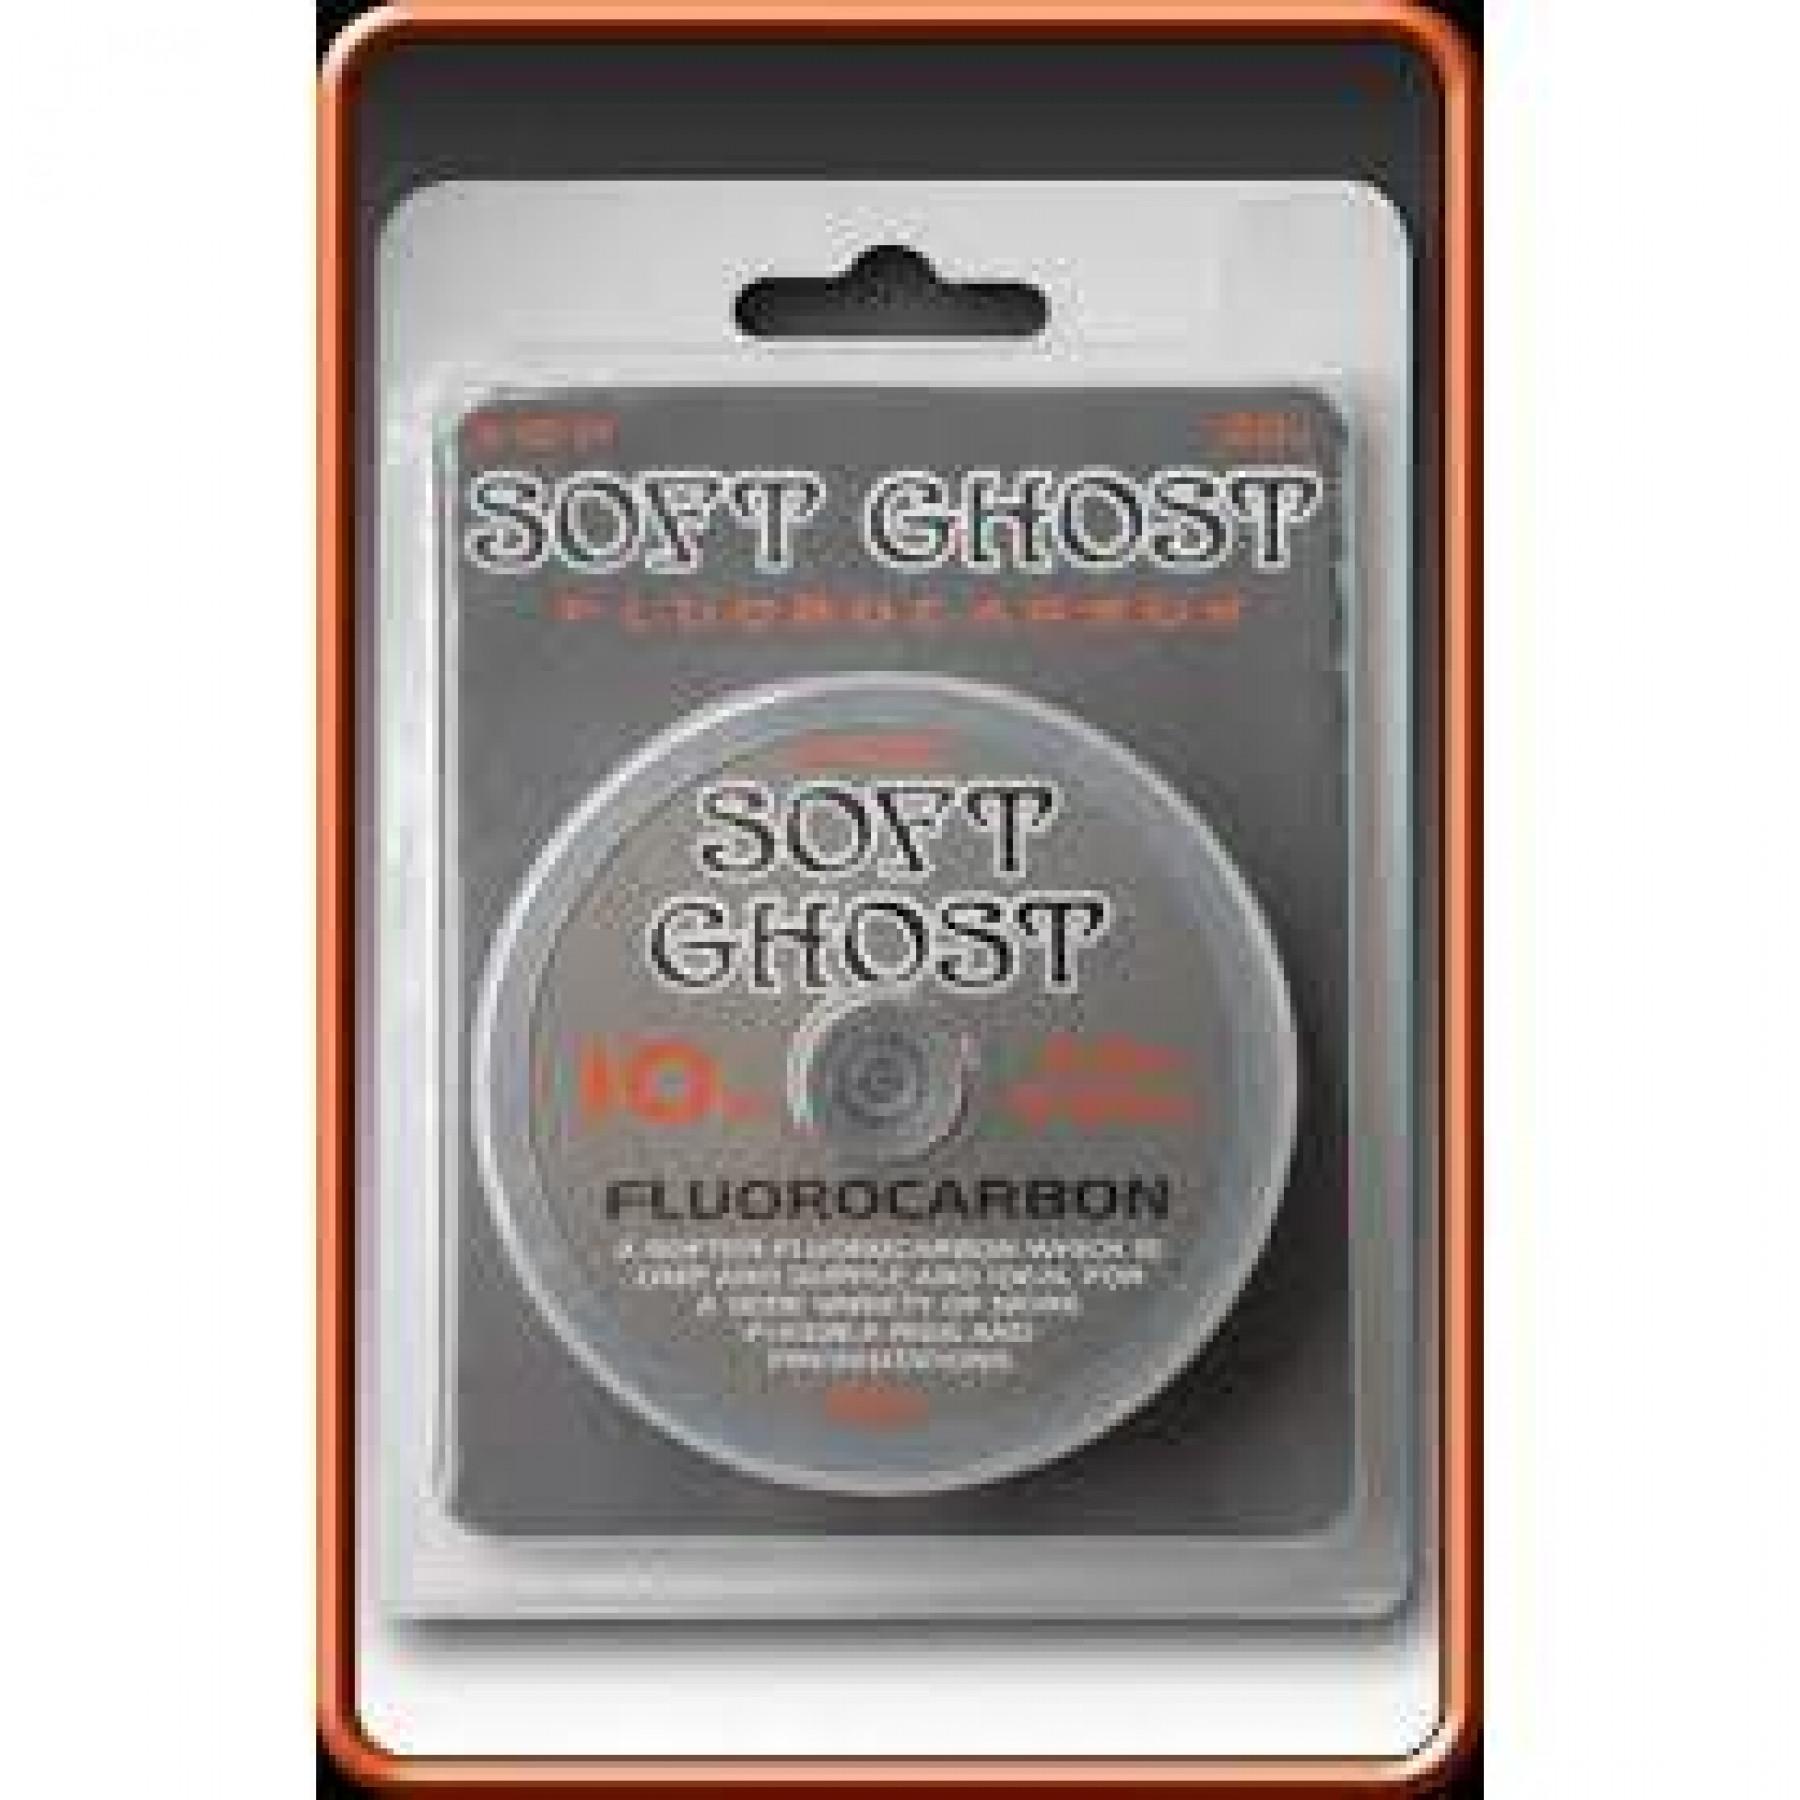 E-S-P Soft Ghost Fluorocarbon Line ALL SIZES 